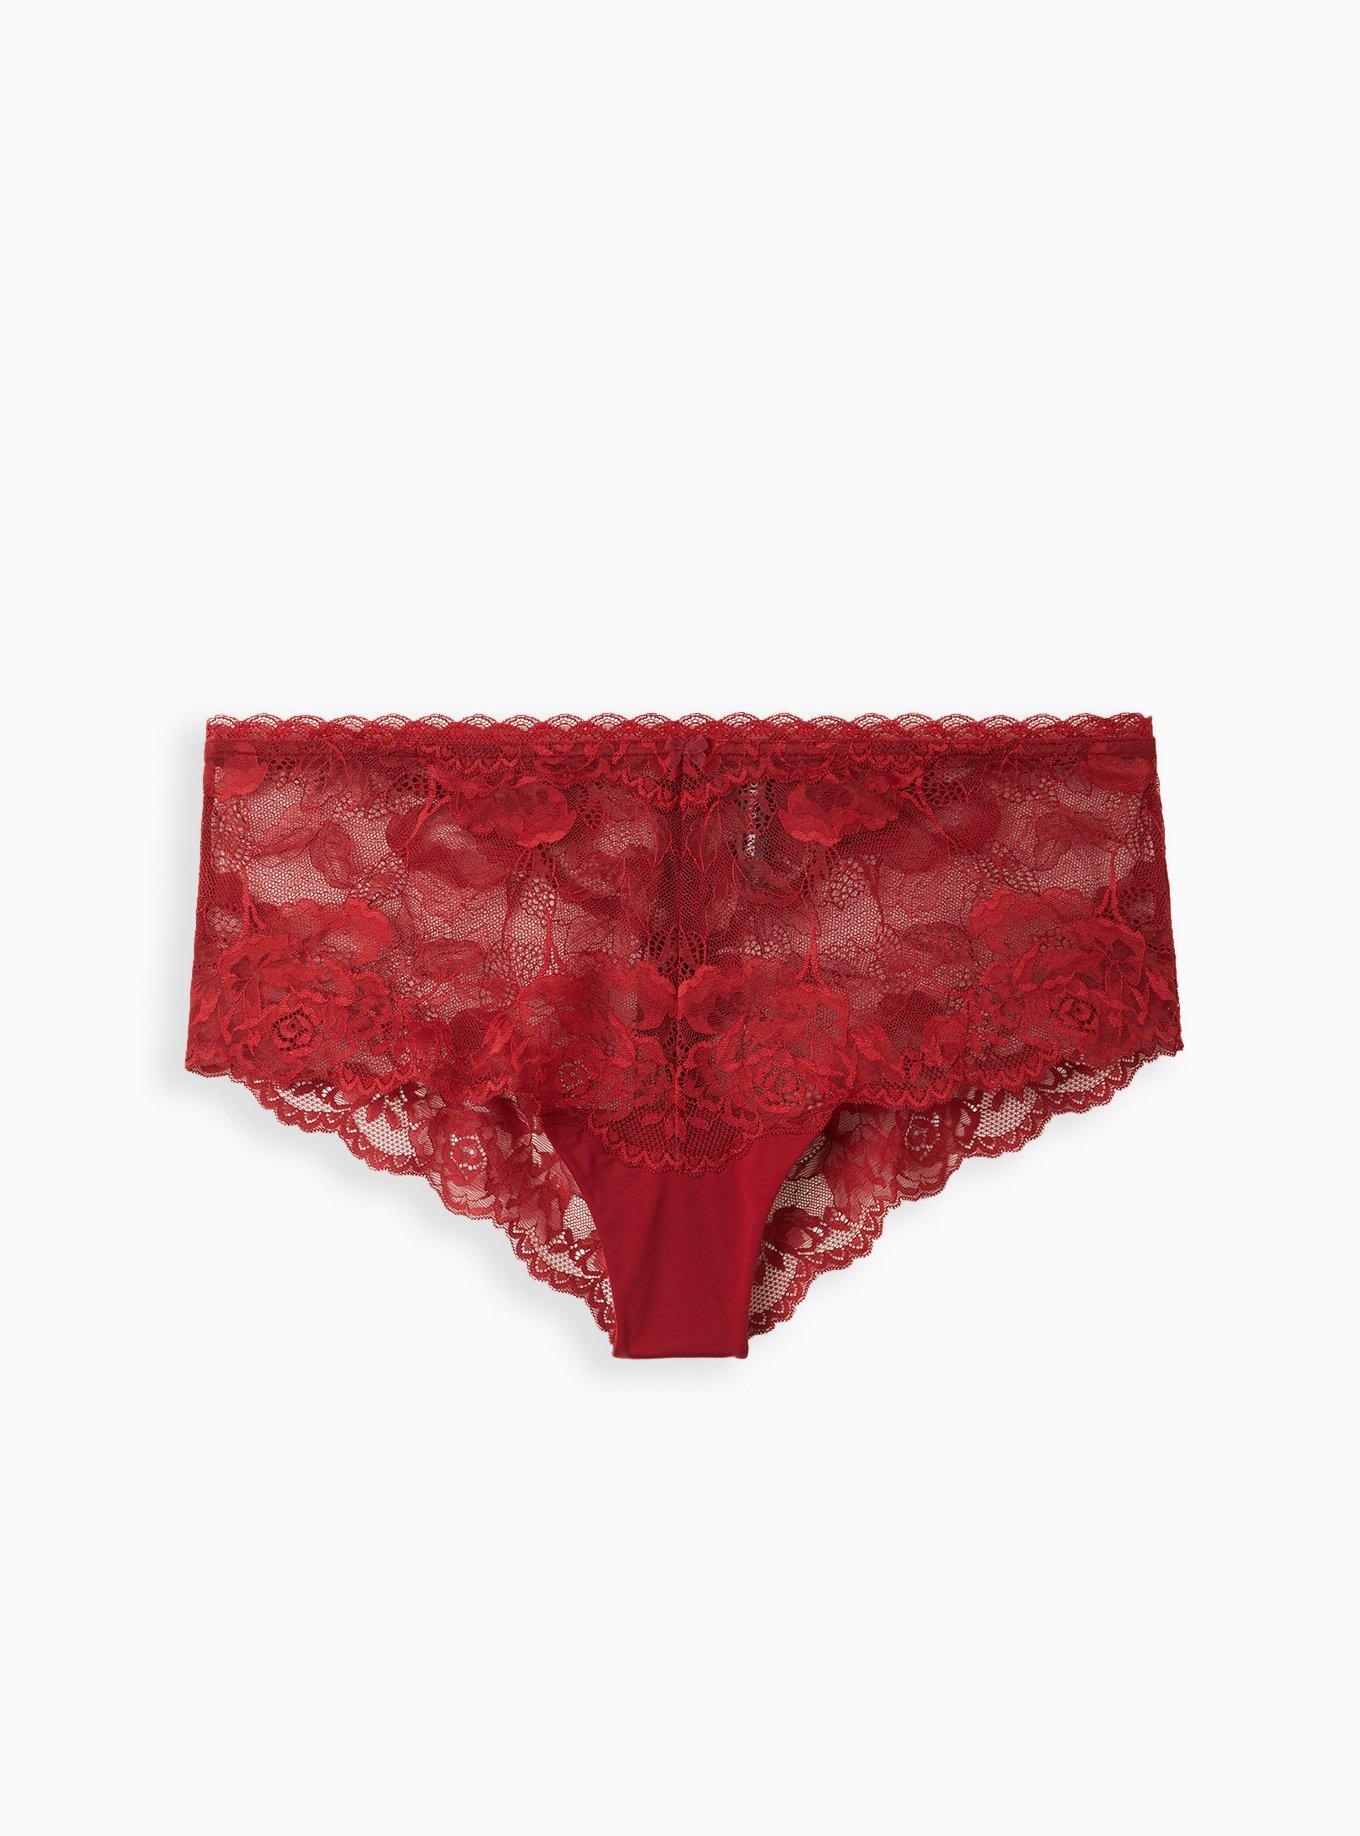 Wholesale comfortable sexy cotton indian ladies panties In Sexy